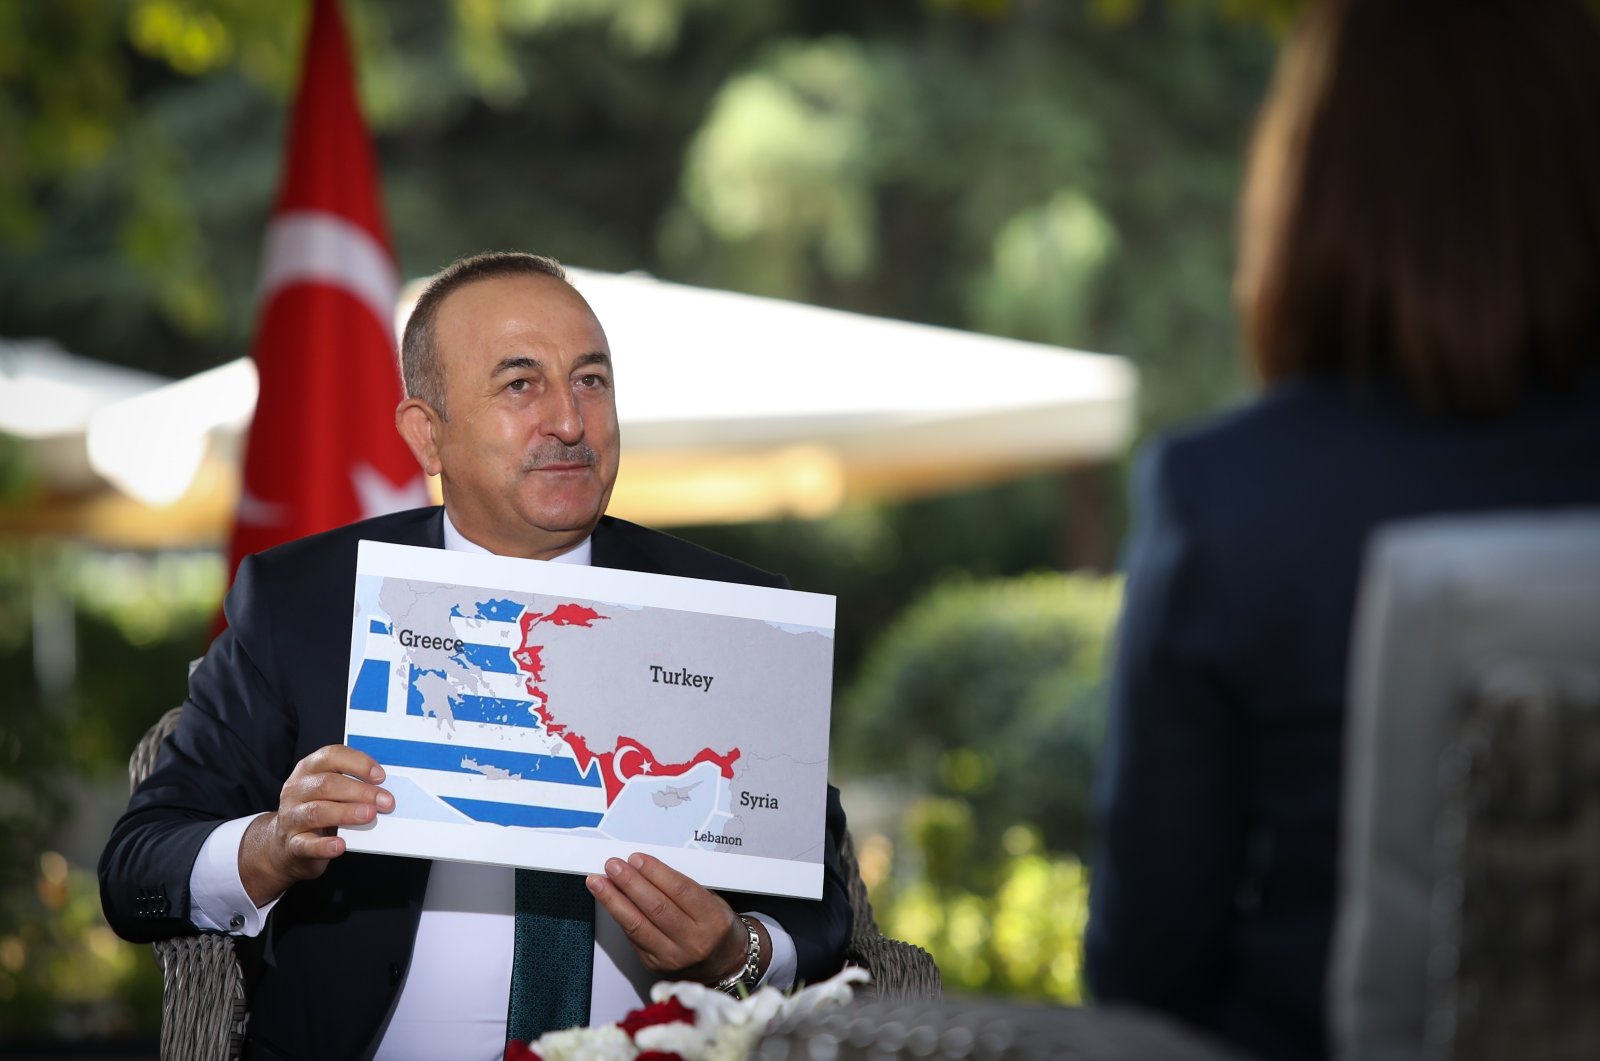 Turkish Foreign Minister Mevlüt Çavuşoğlu speaks on tensions in the Eastern Mediterranean during a televised interview with NTV, Sept. 14, 2020. (AA Photo)